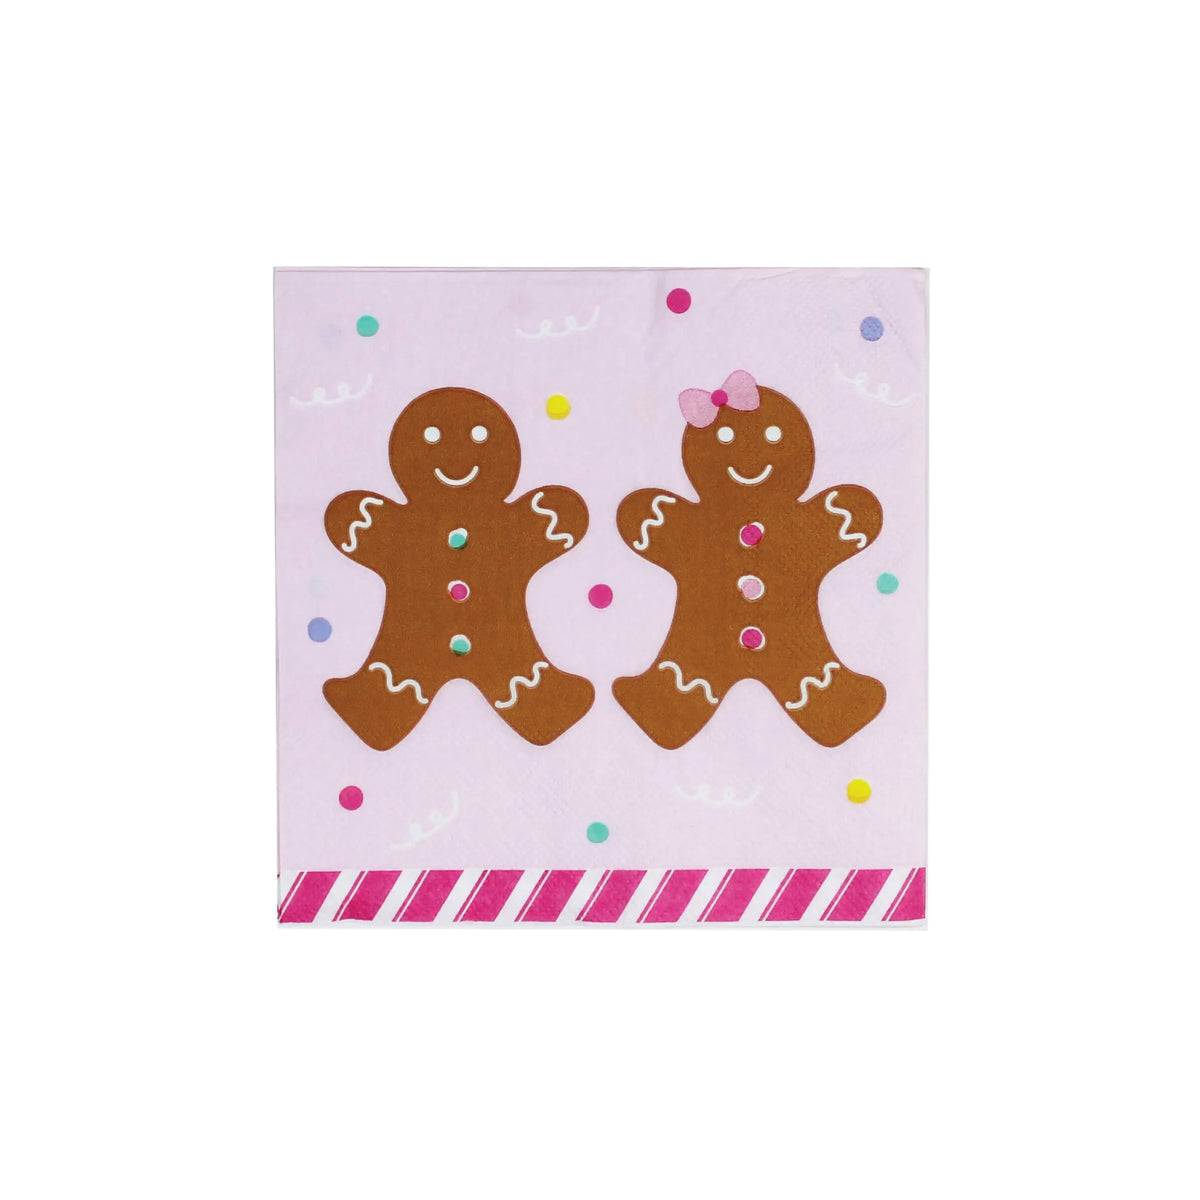 Pink Gingerbread House Paper Cups 12ct